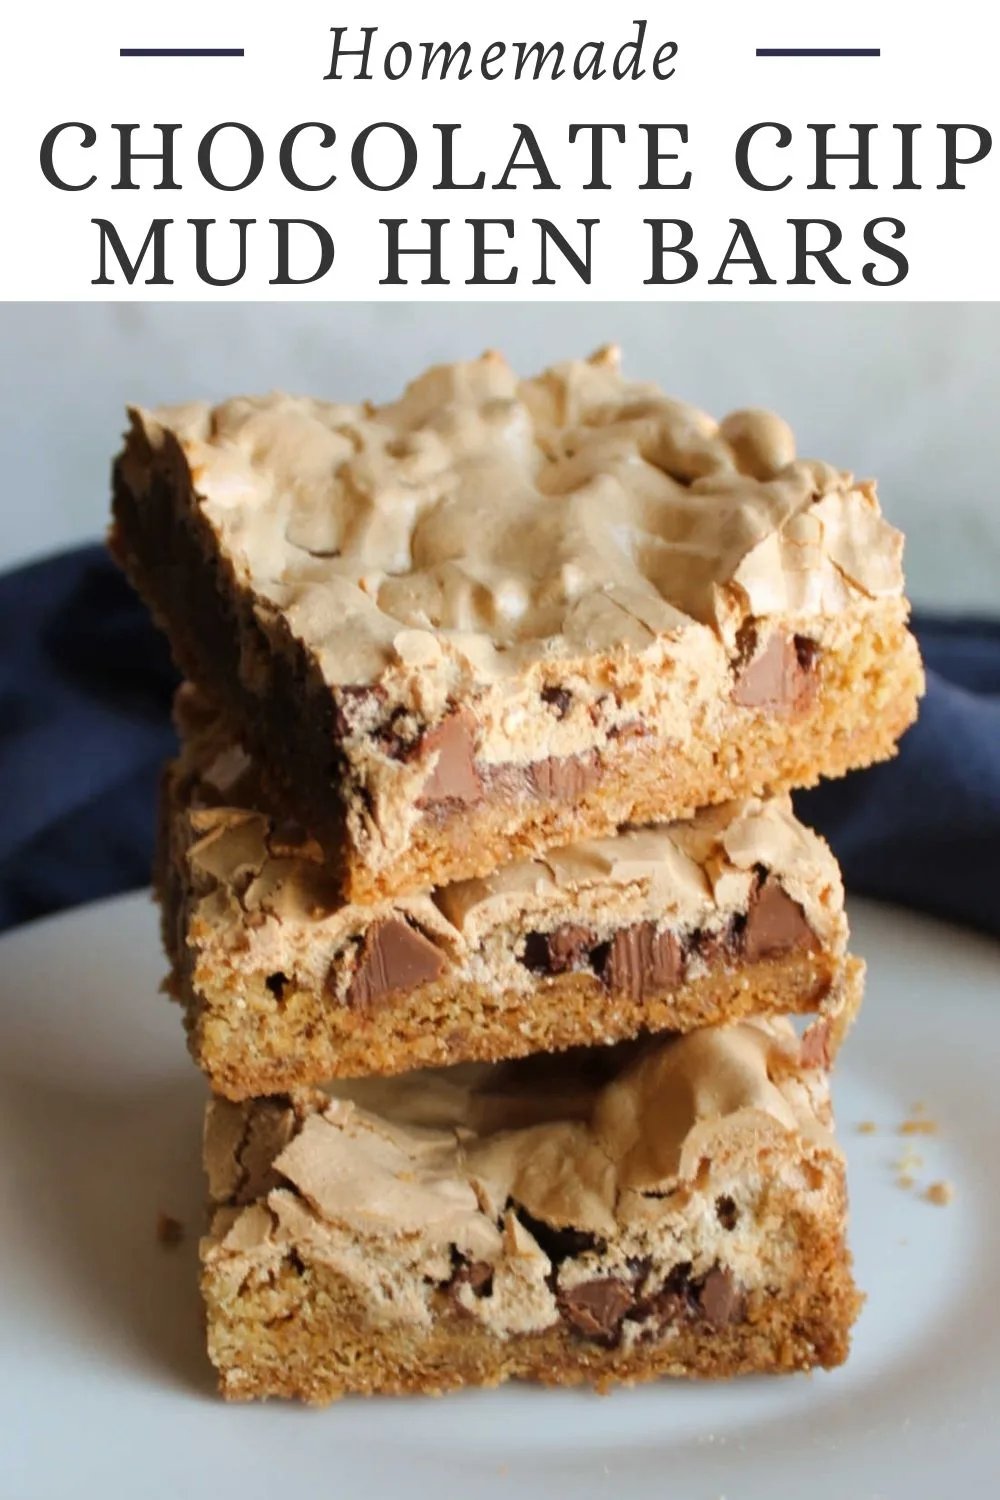 Mud hen bars are built on a shortbread style cookie crust topped with chocolate chips and brown sugar meringue. The results are a delicious dessert that has the perfect combination of flavors and textures.